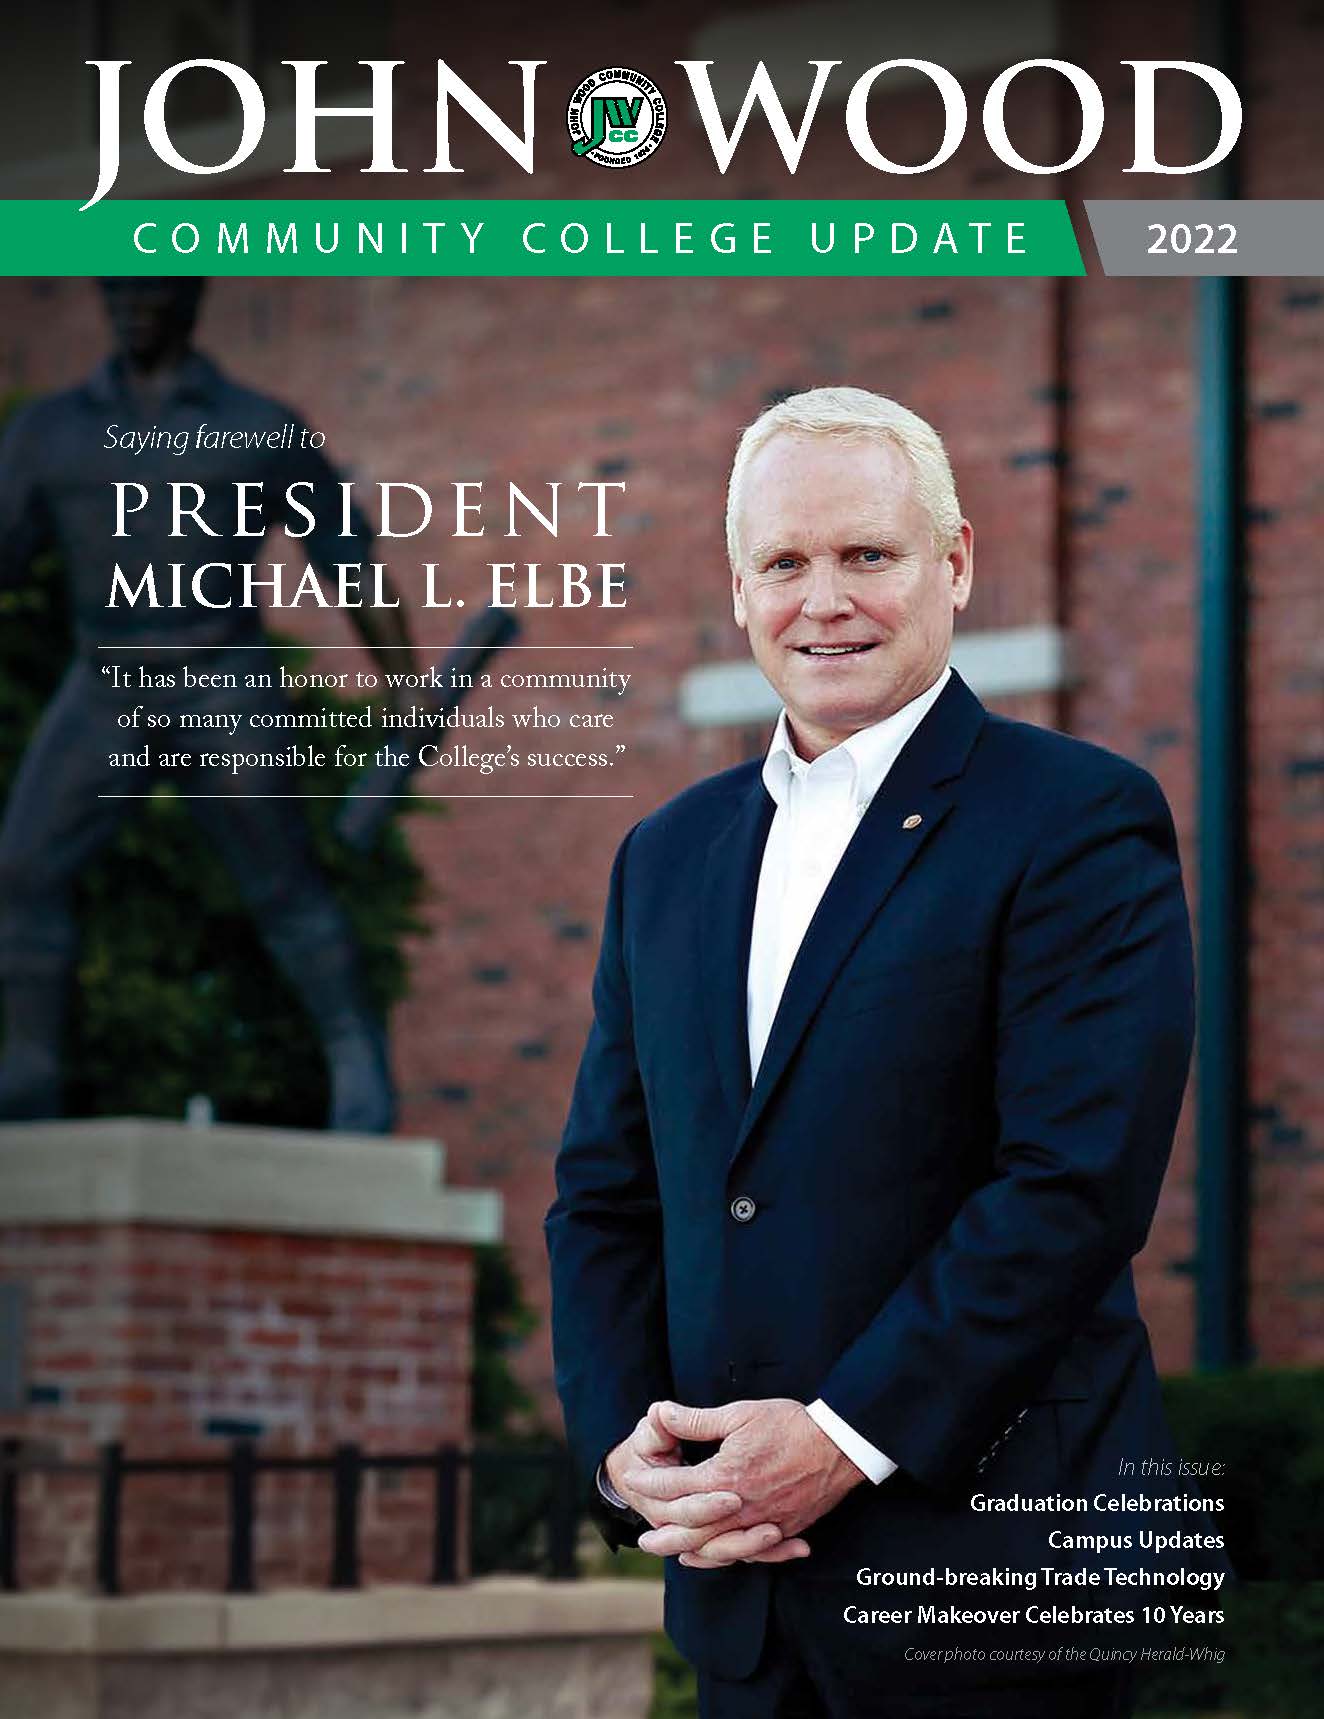 Saying farewell to Mike Elbe - JWCC annual newsletter